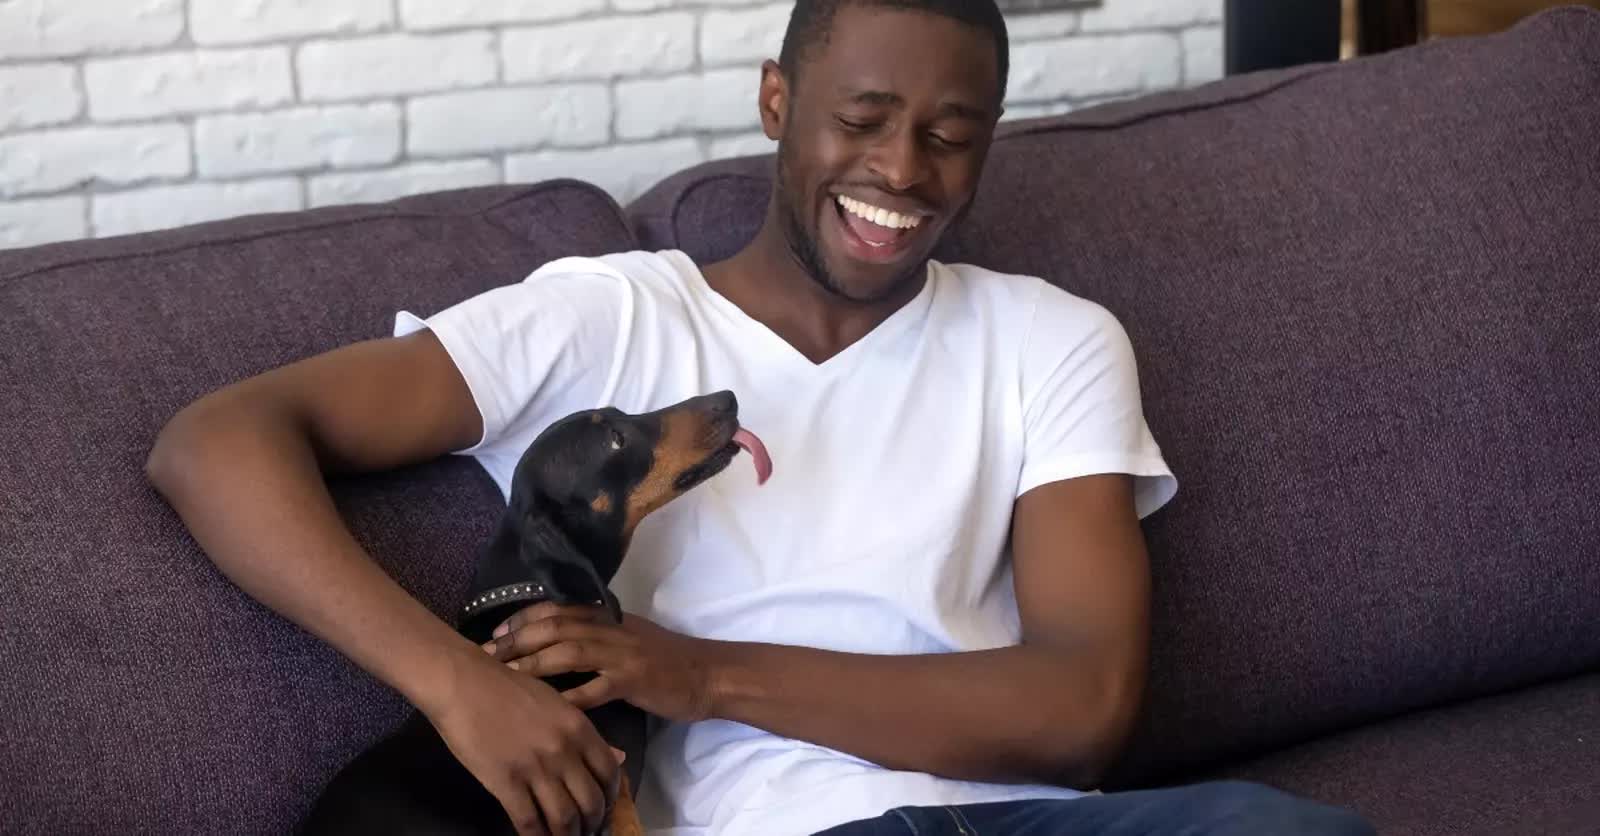 Man laughing with his pet dachshund